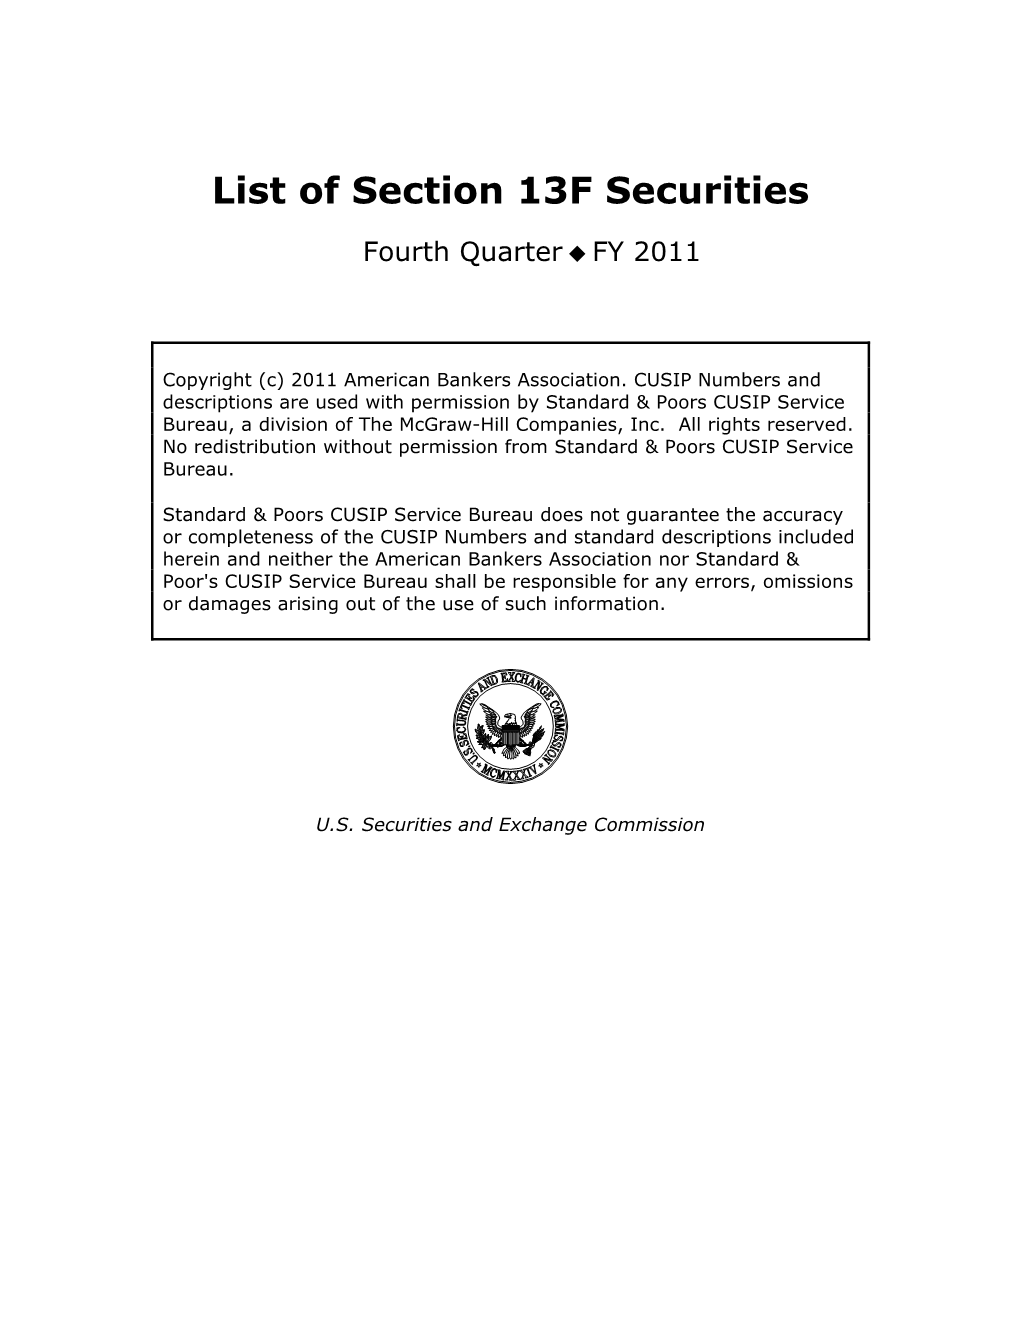 List of Section 13F Securities, Fourth Quarter, 2011